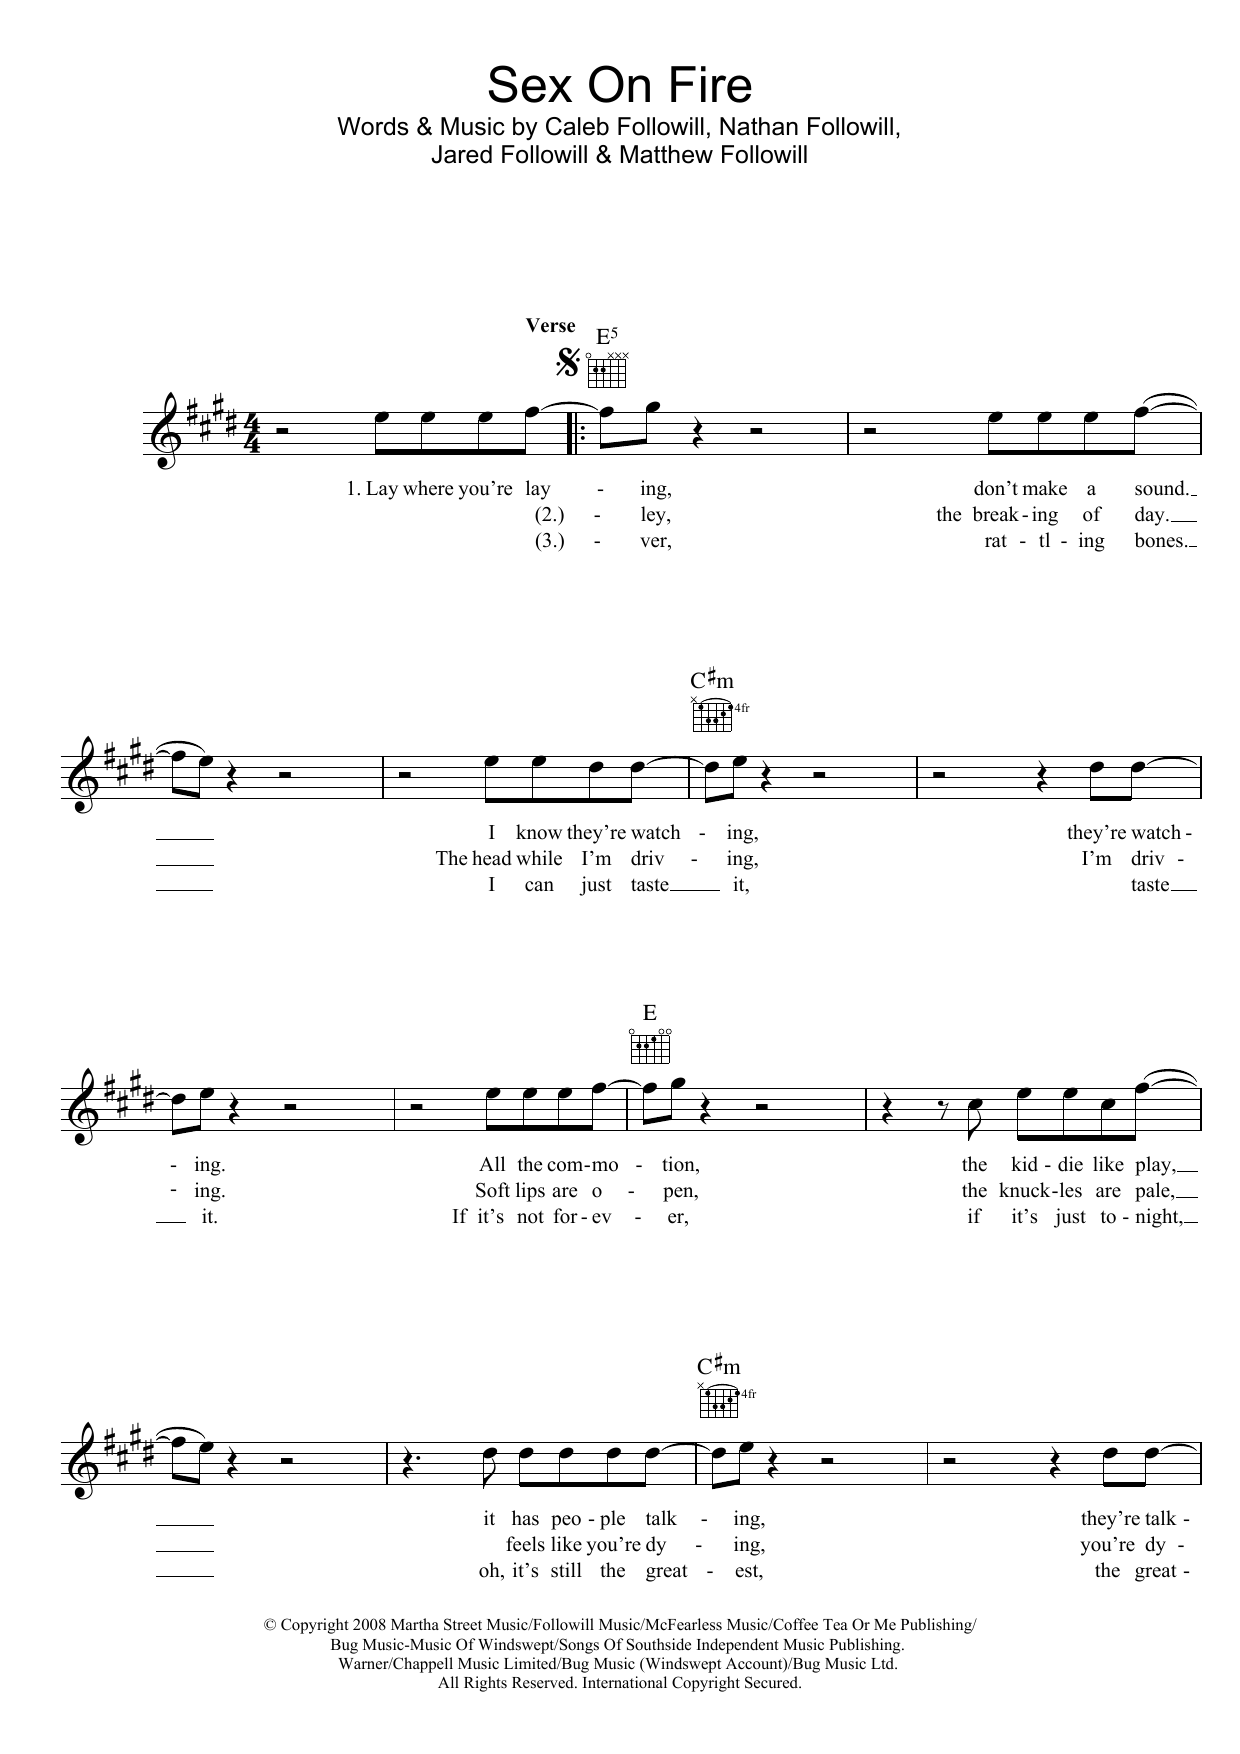 Download Kings Of Leon Sex On Fire Sheet Music